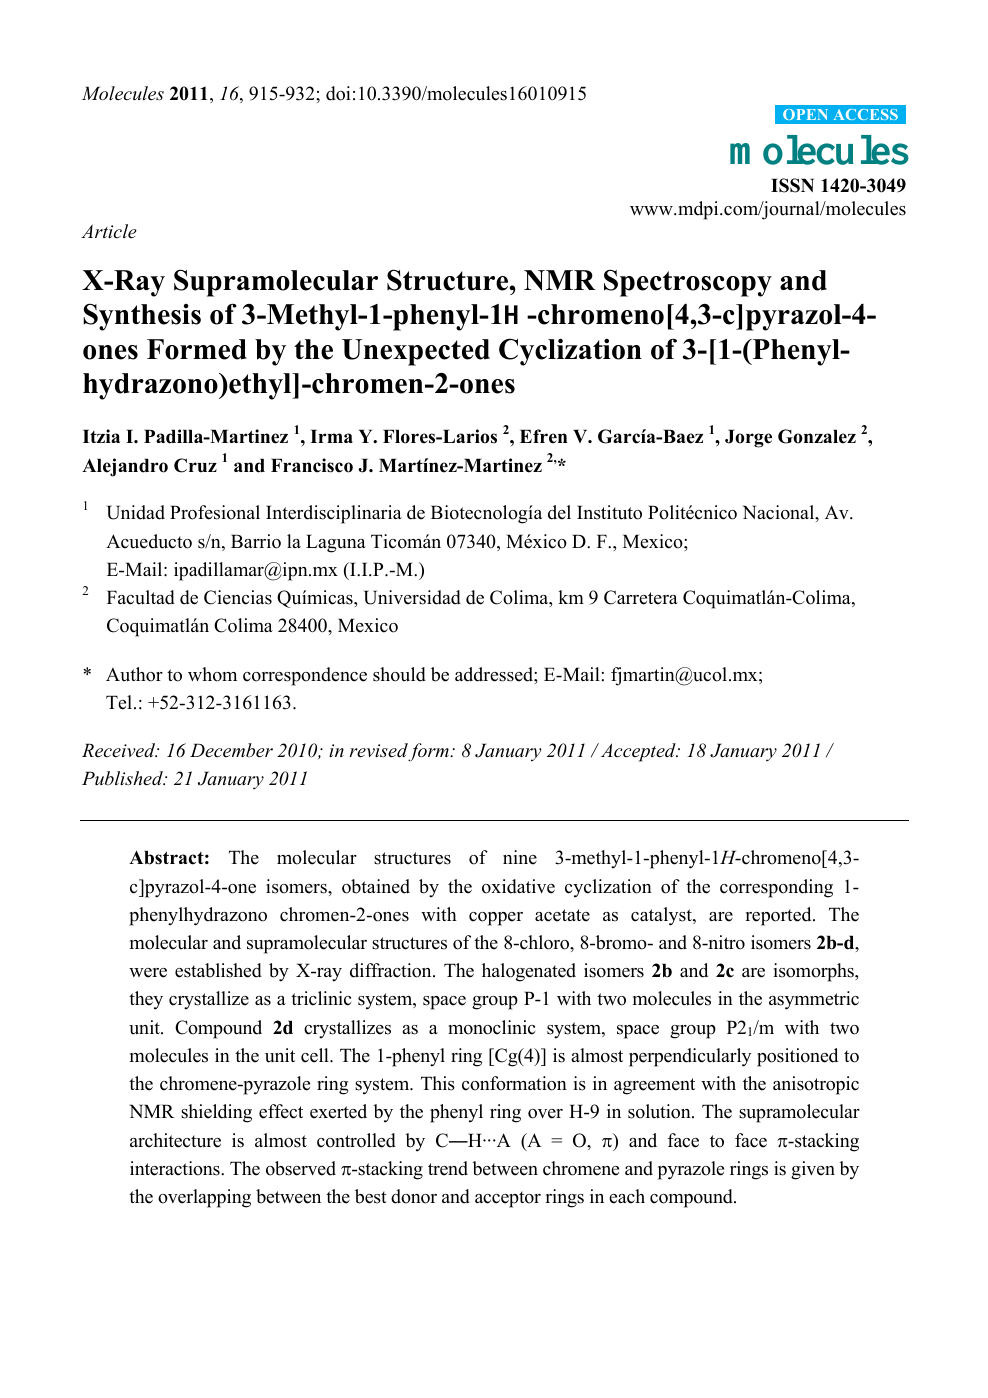 X-Ray Supramolecular Structure, NMR Spectroscopy and Synthesis of 